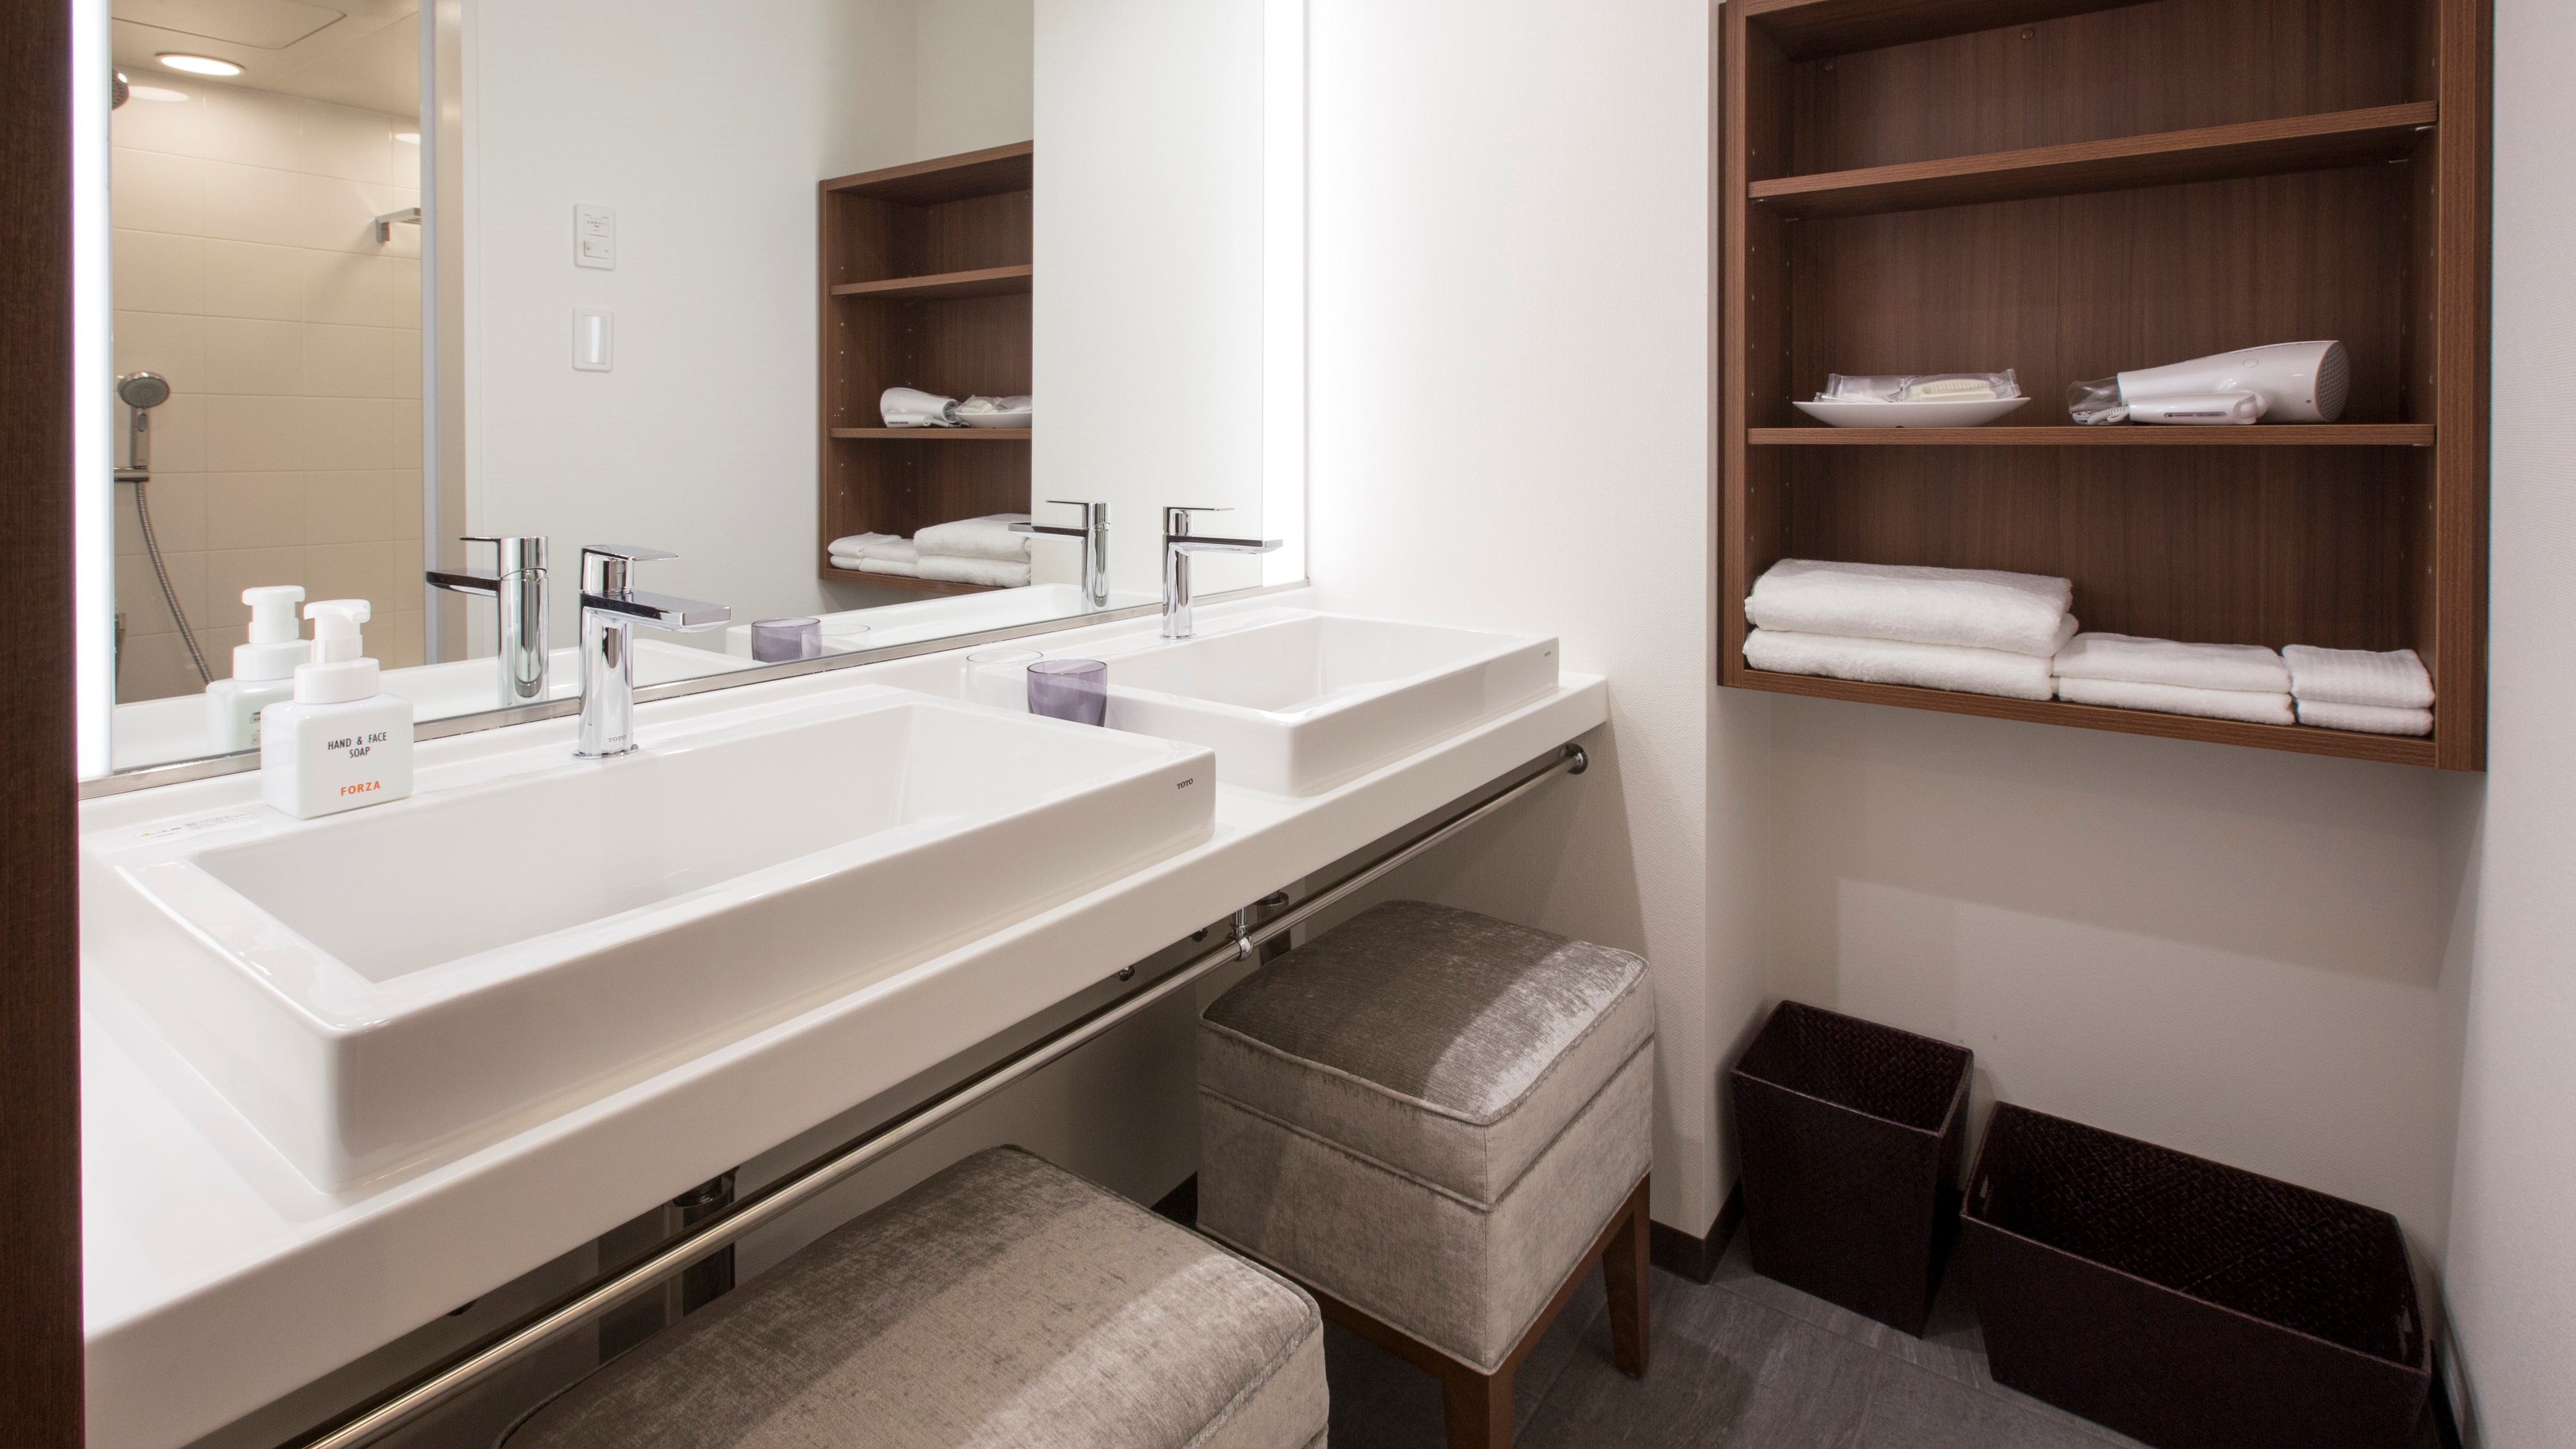 "Certina in Twin" is equipped with two washbasins that are safe even in the morning in a hurry